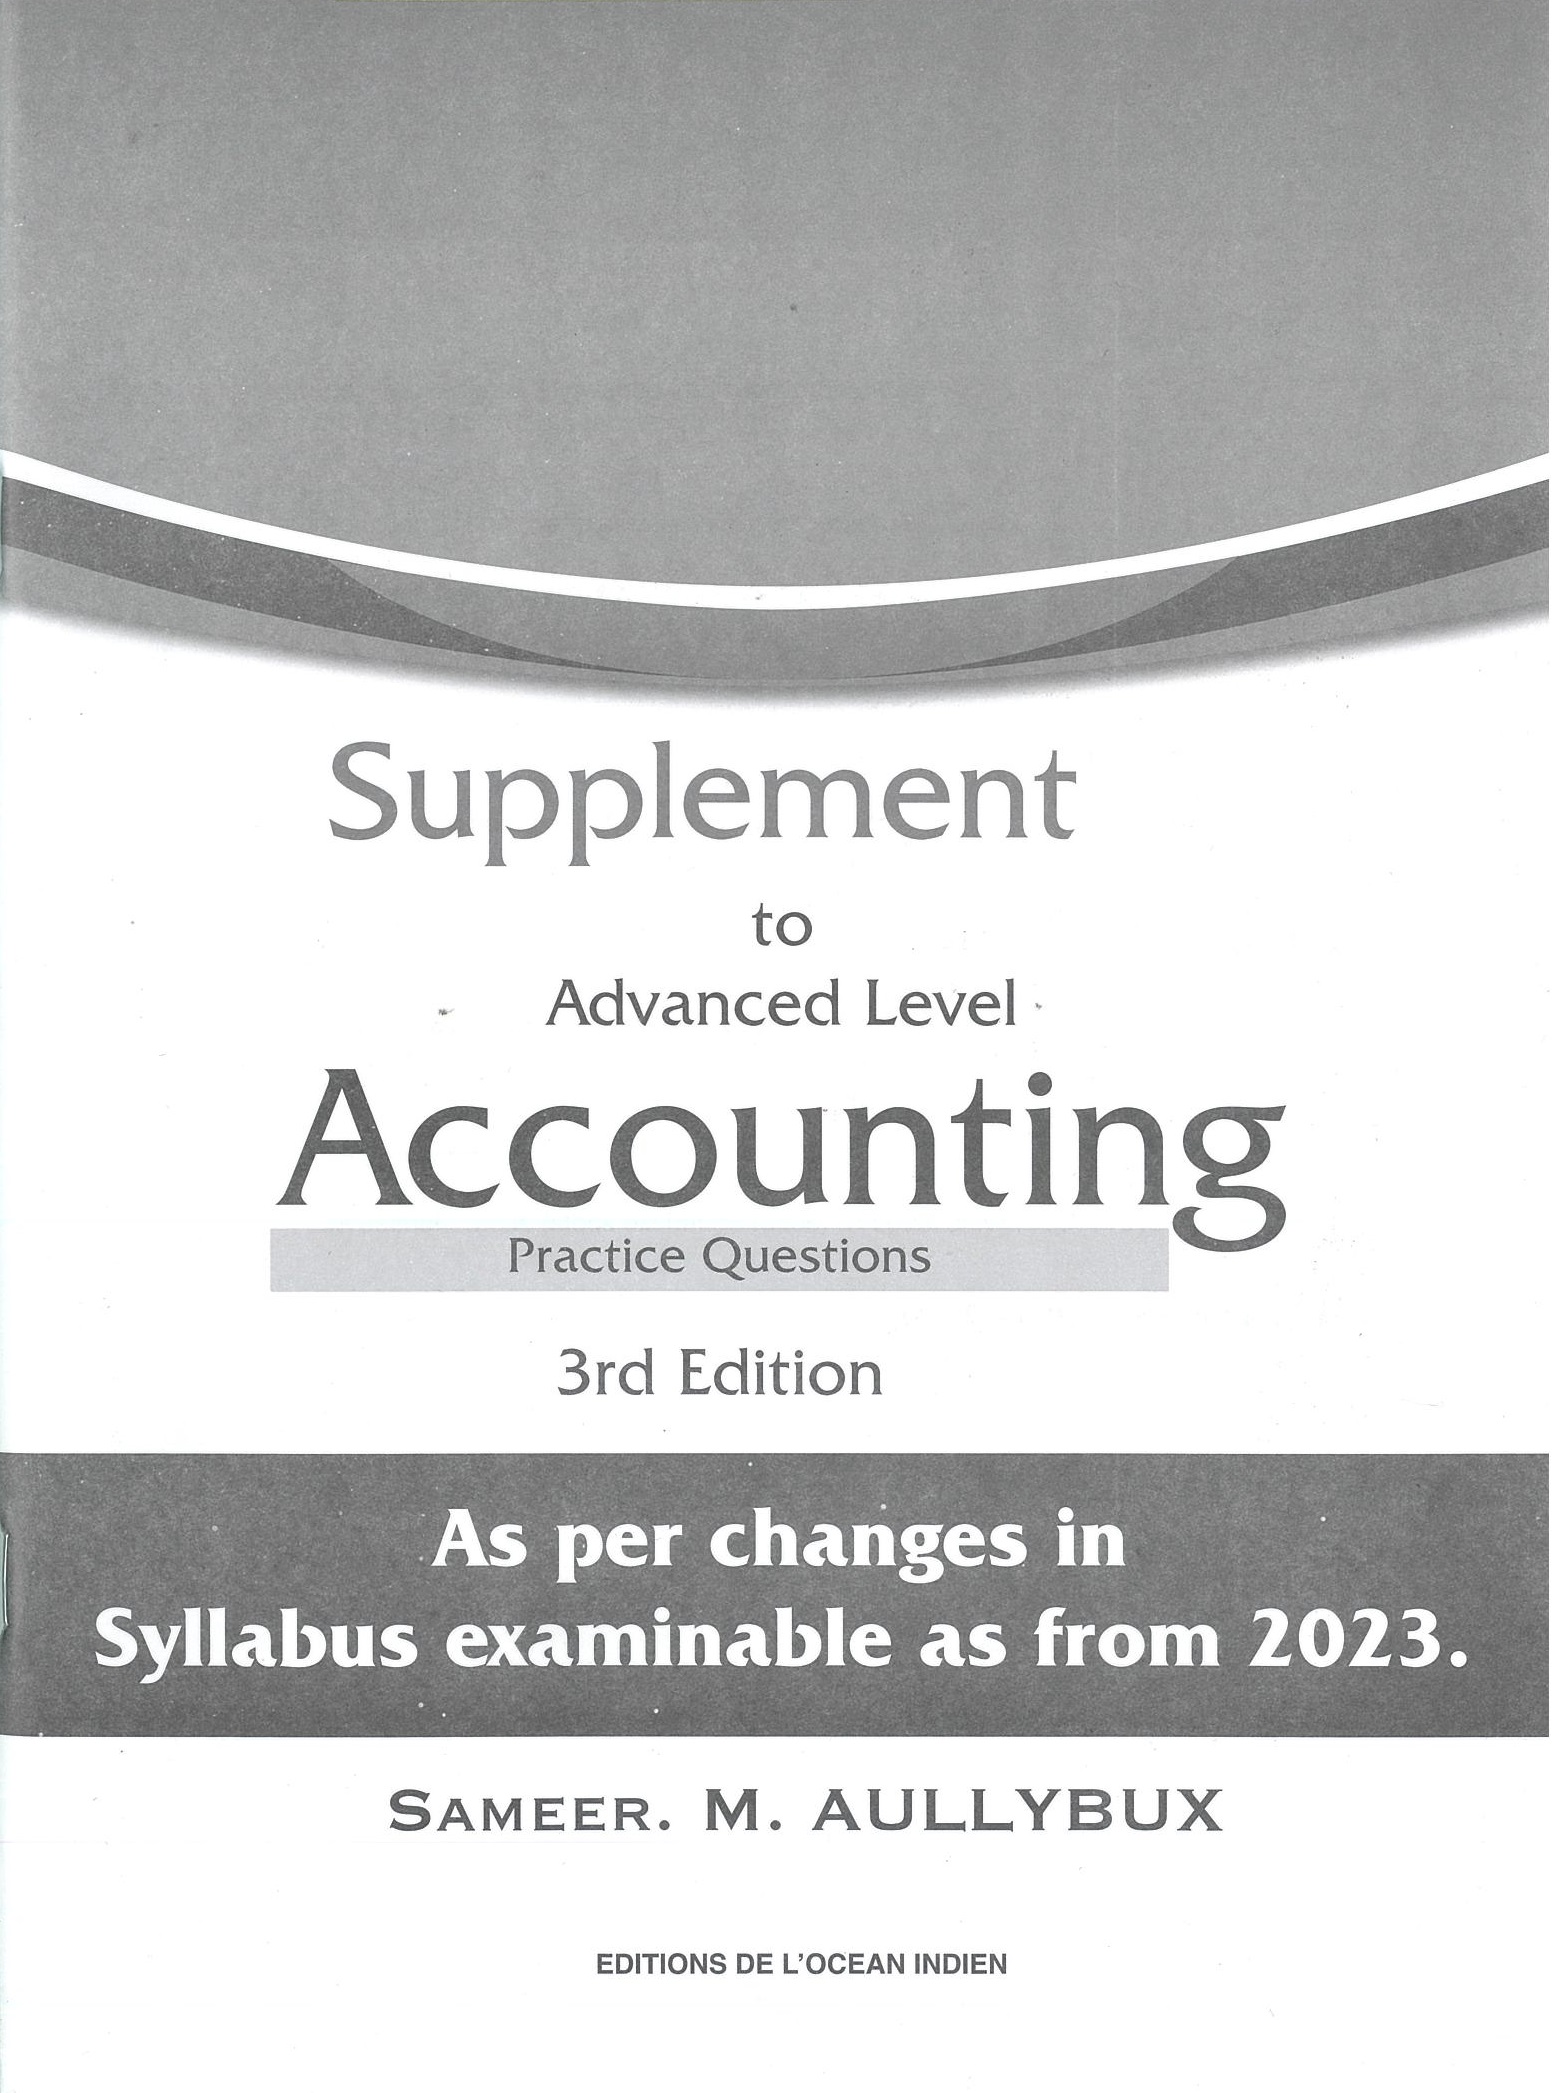 SUPPLEMENT - ADVANCED LEVEL ACCOUNTING PRACTICE QUESTIONS 3RD ED 2021 - AULLYBUX